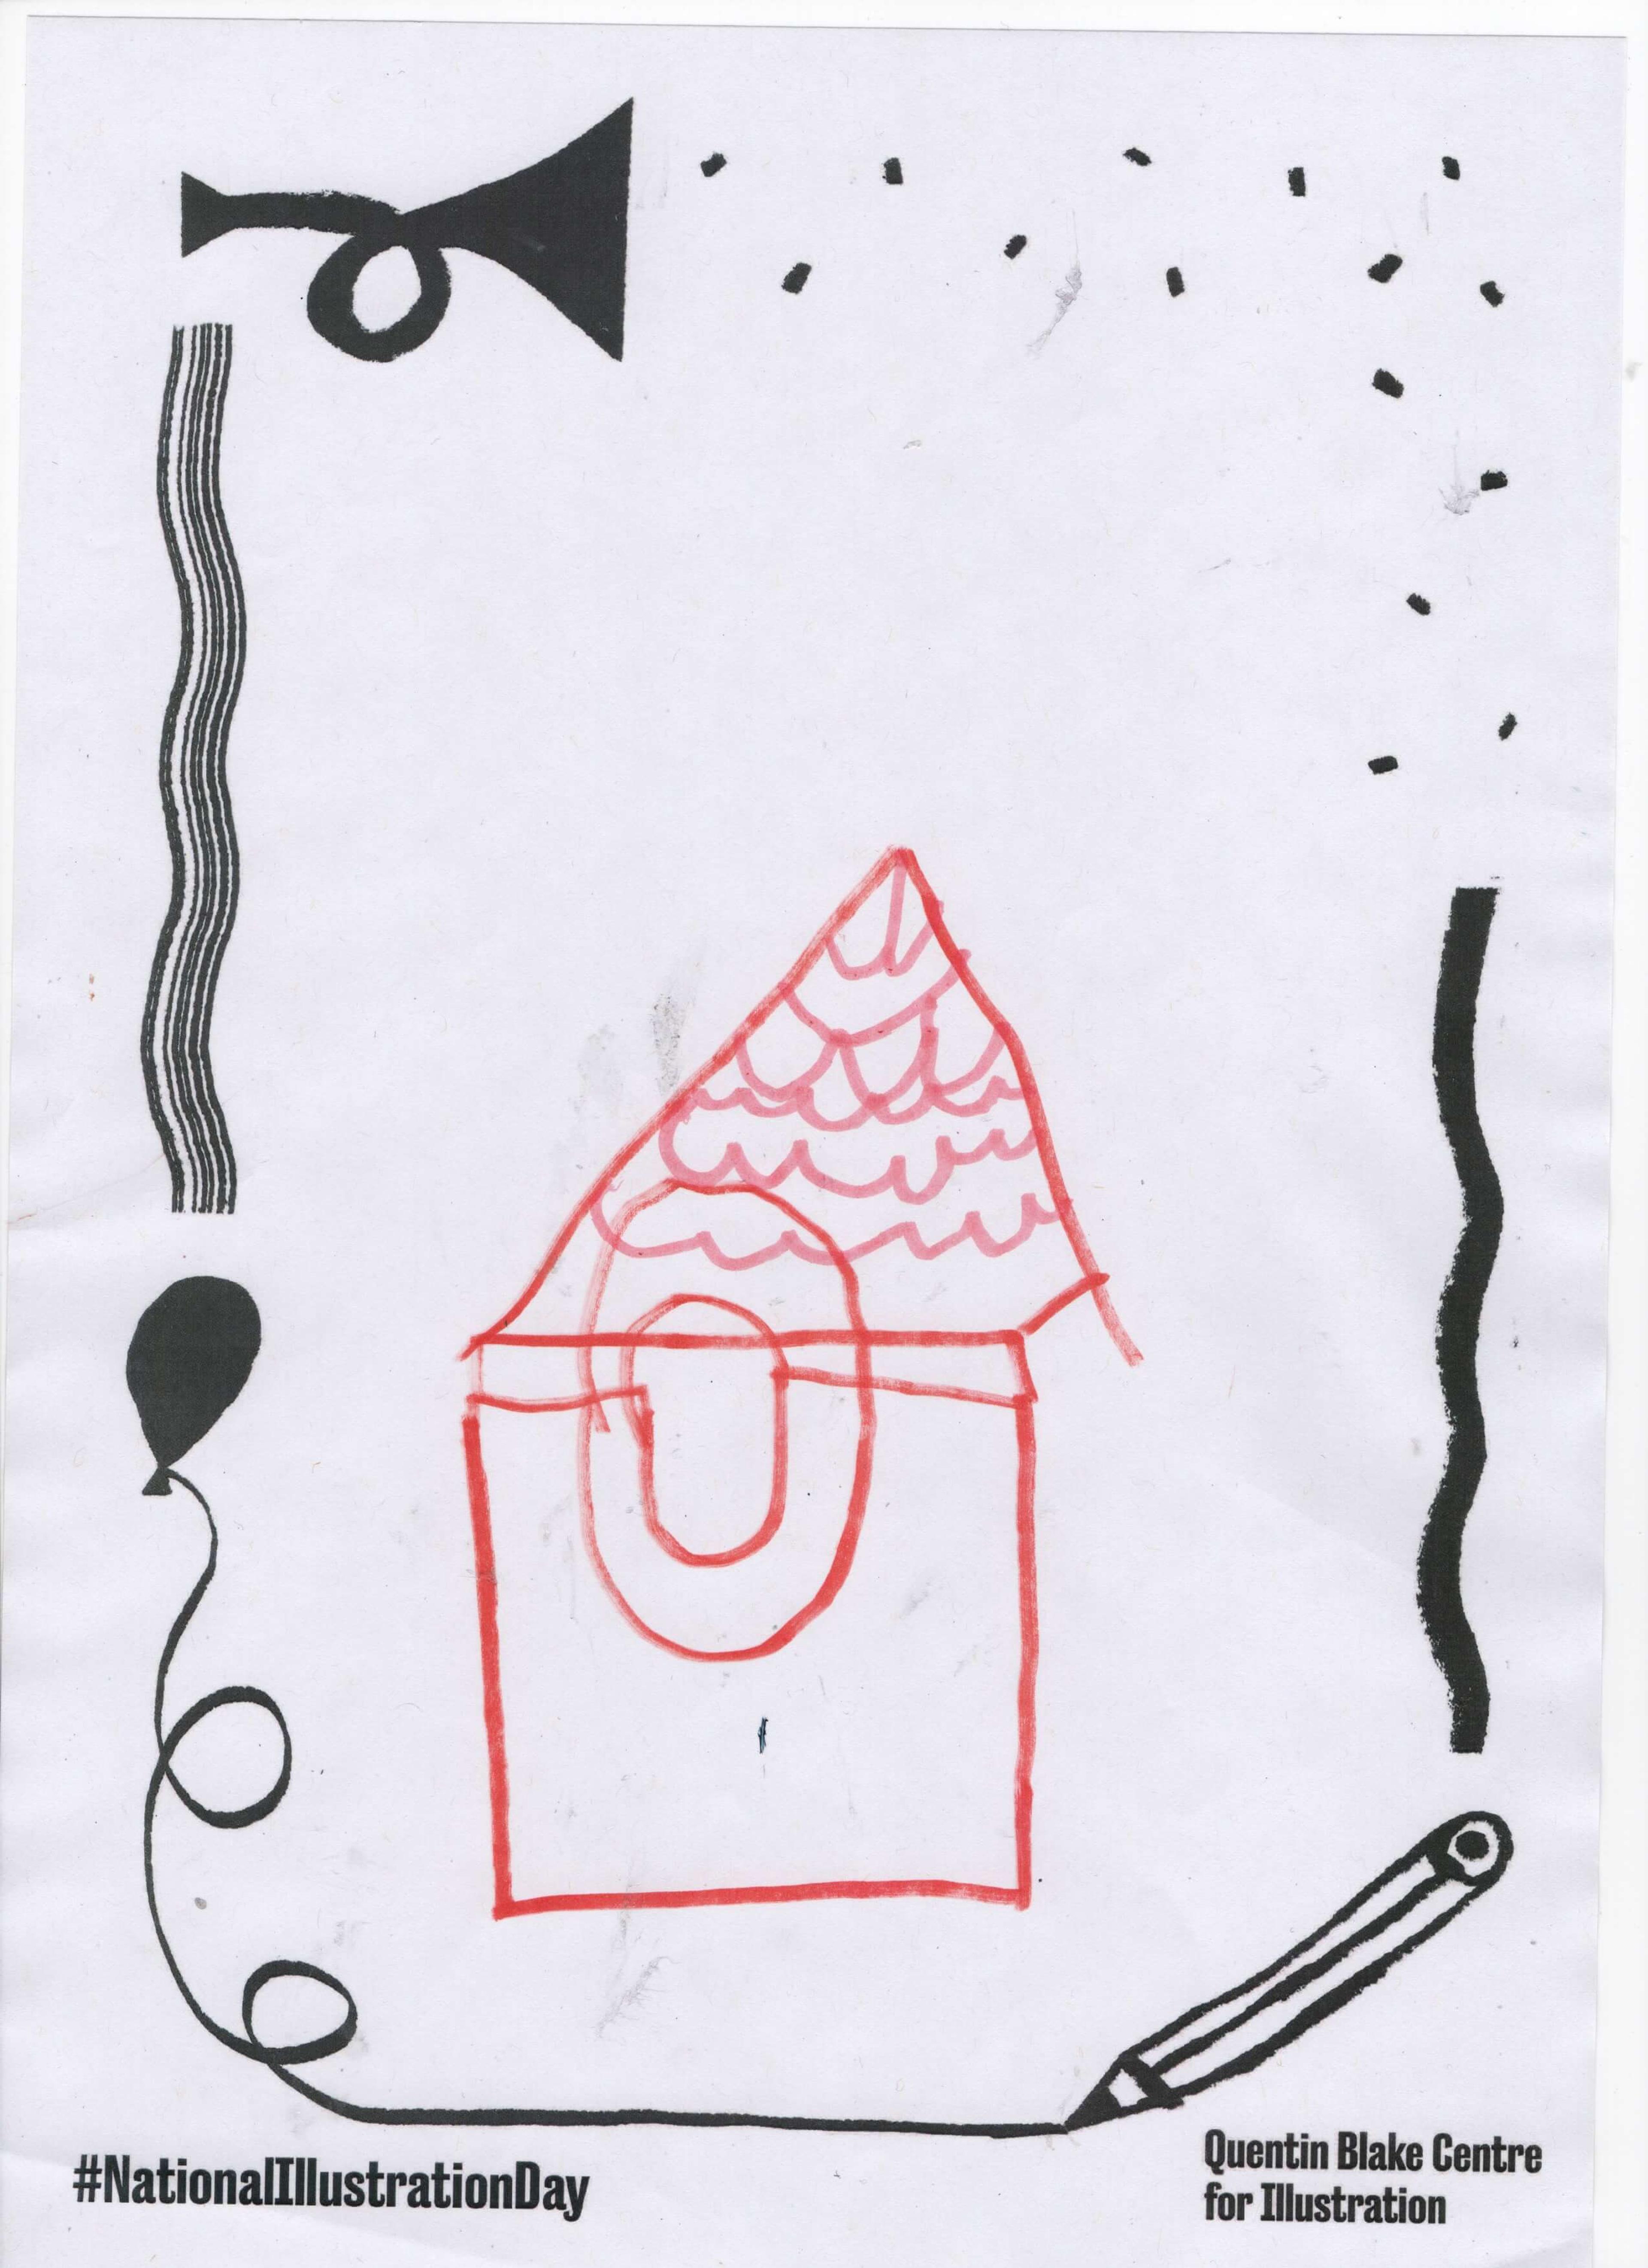 An outline drawing of a simple house, drawn using red pencil.